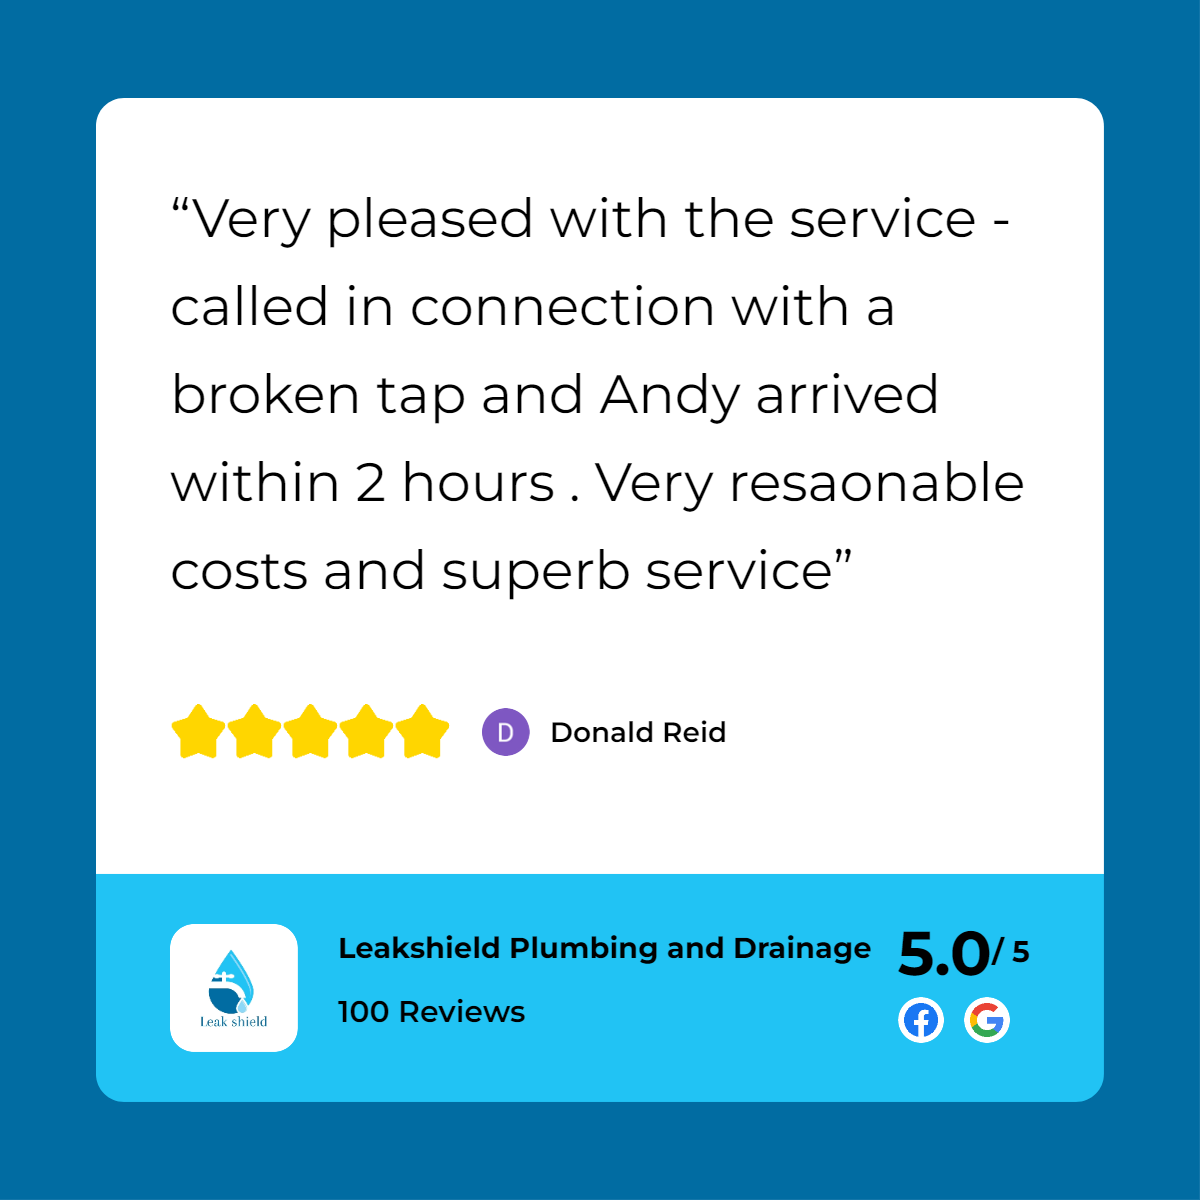 A customer review for leeds plumbing service.